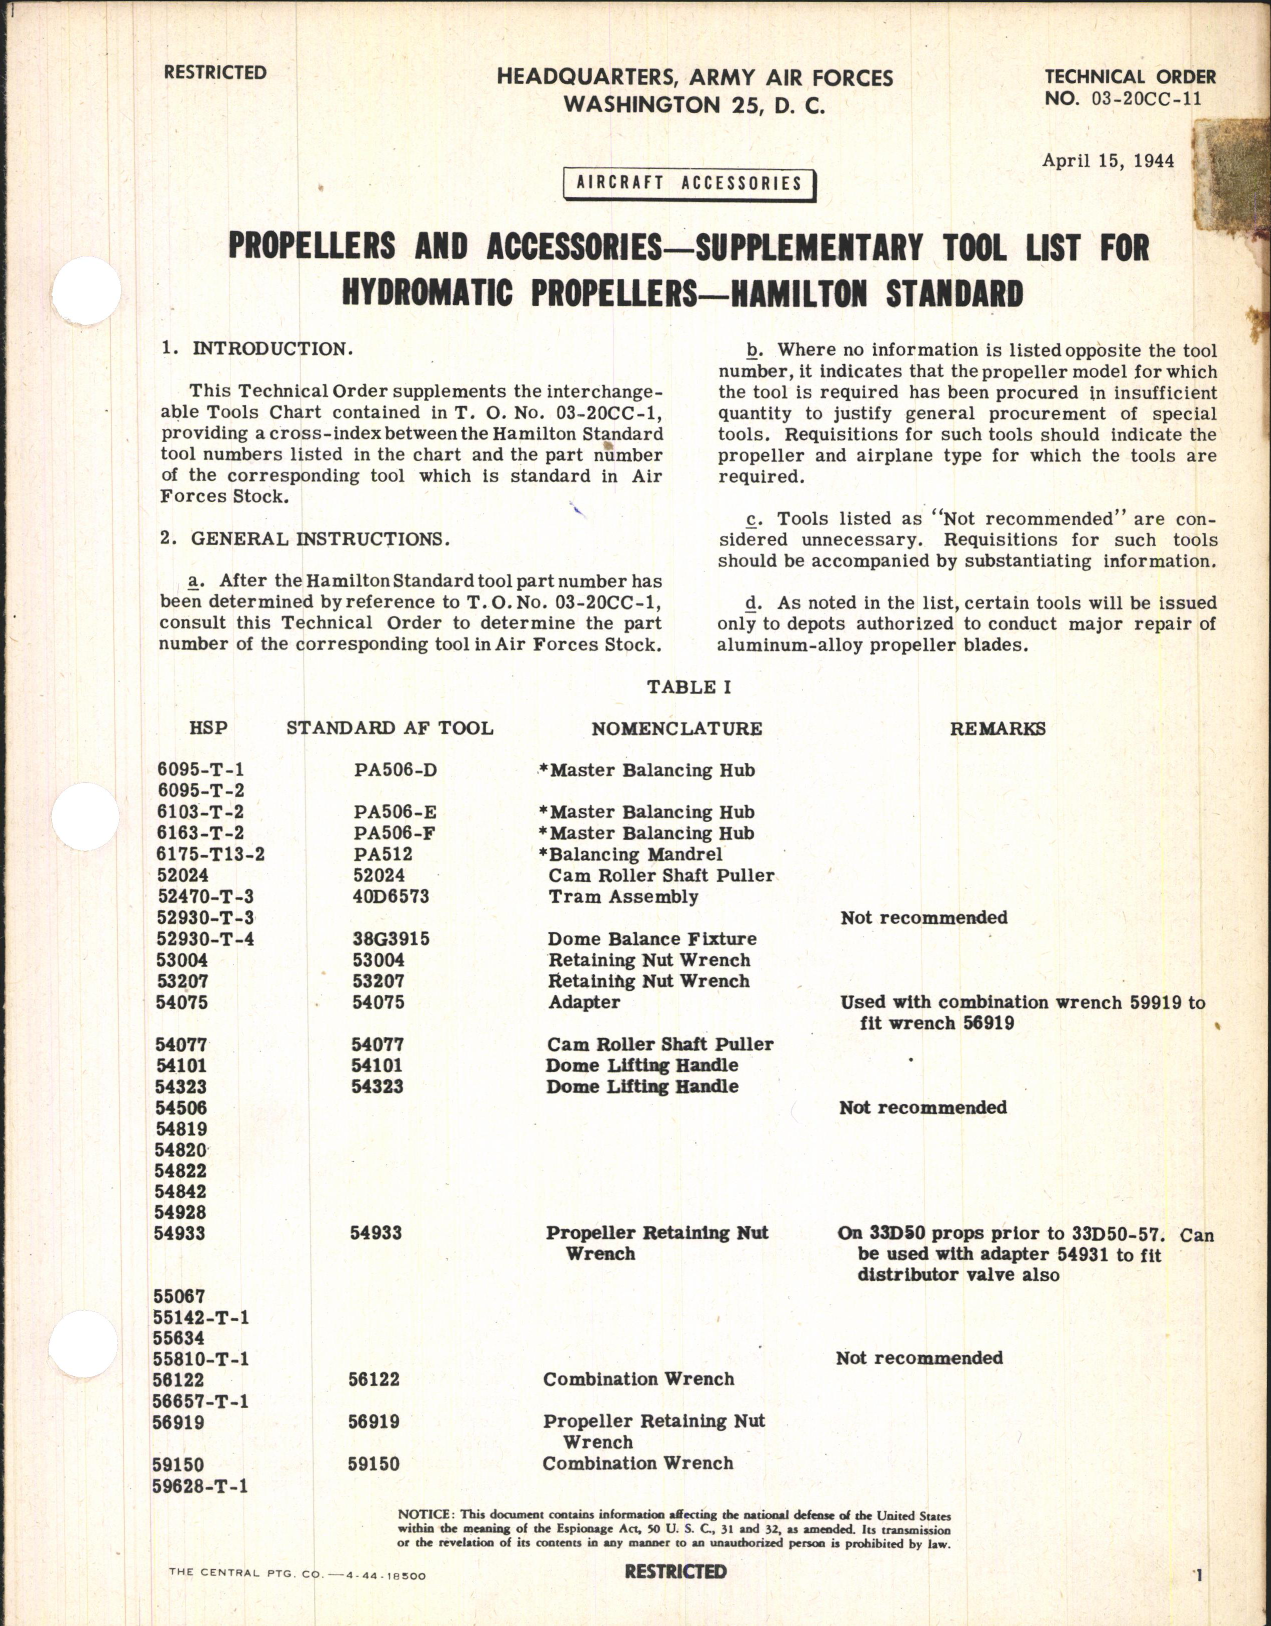 Sample page 1 from AirCorps Library document: Supplementary Tool List for Hydromatic Propellers - Hamilton Standard